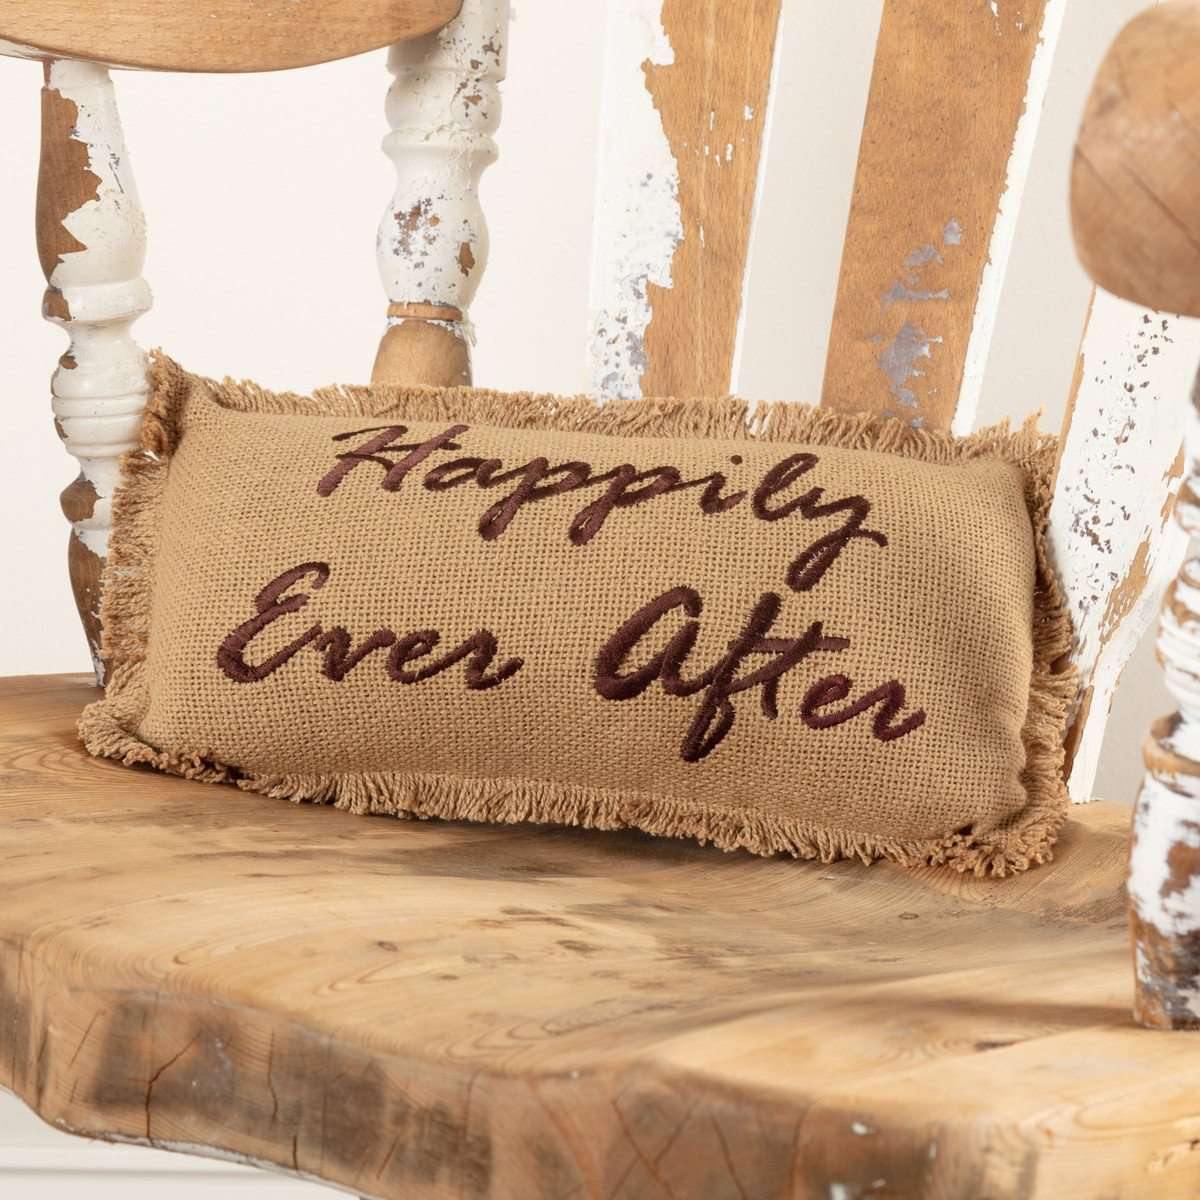 Burlap Natural Pillow Happily Ever After 7x13 VHC Brands